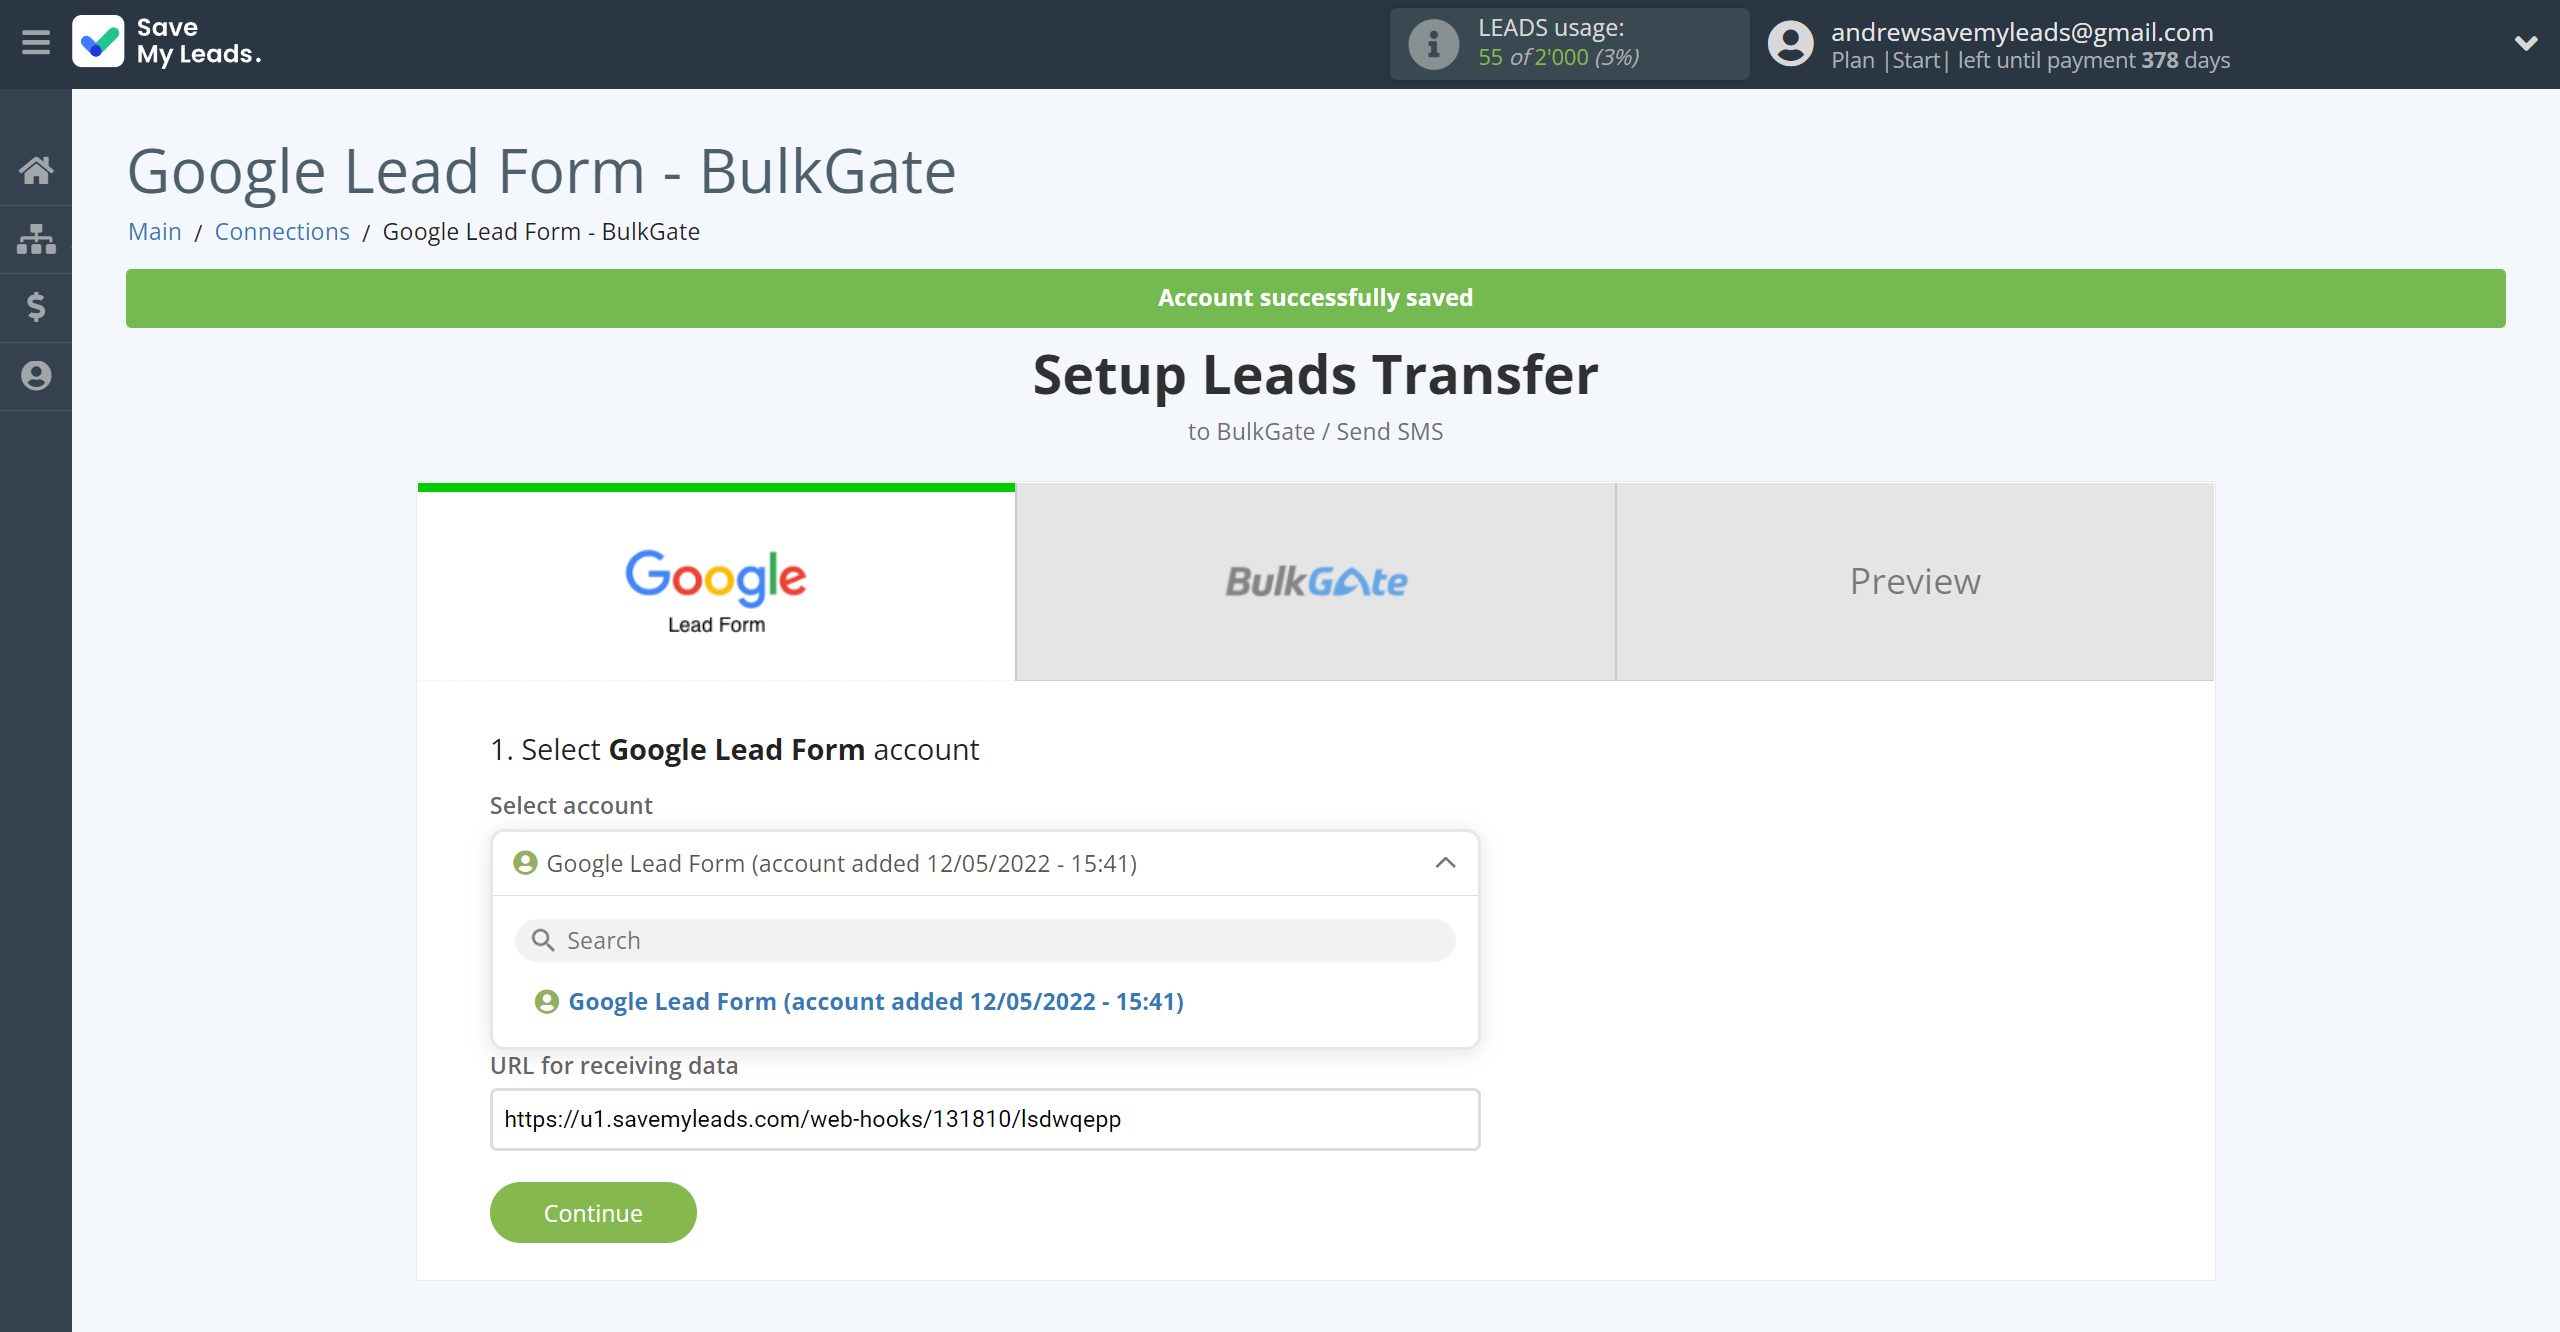 How to Connect Google Lead Form with BulkGate | Data Source account selection